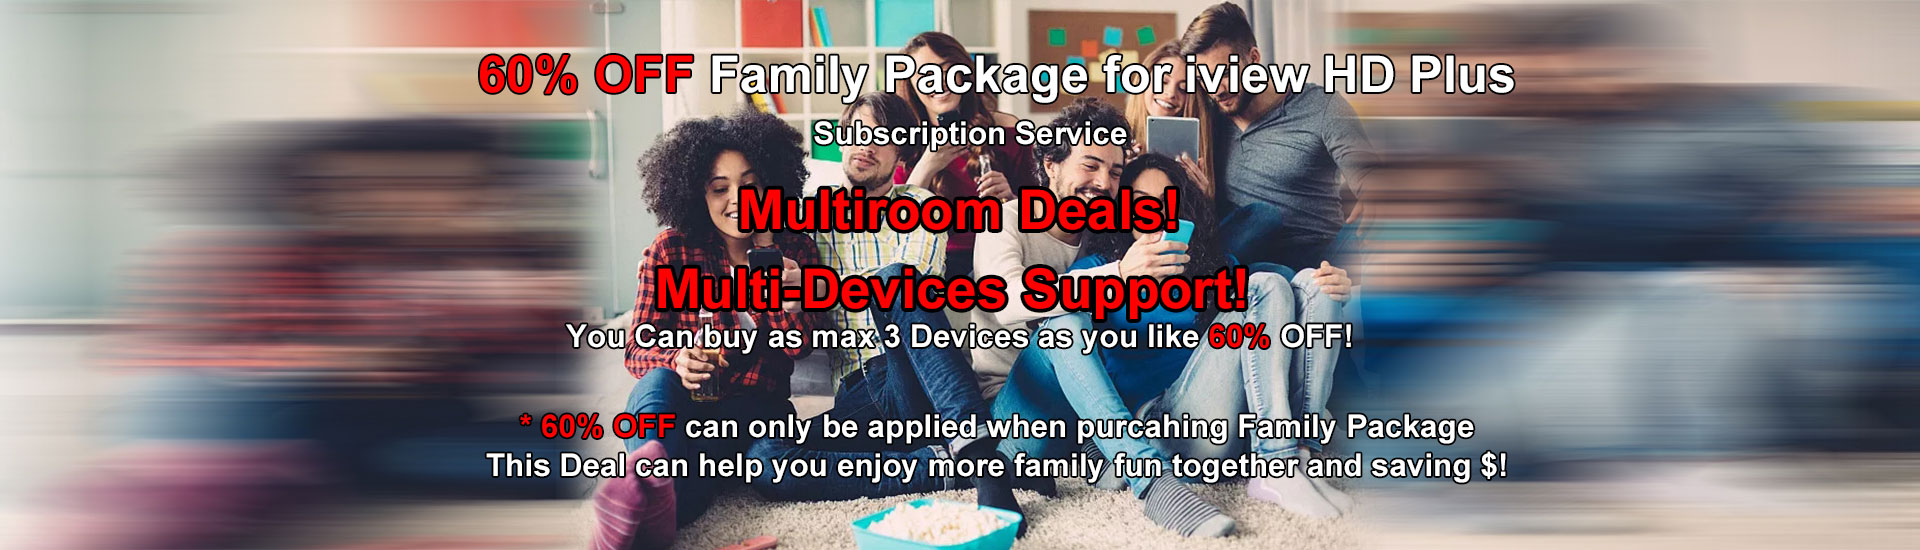 60% off family package